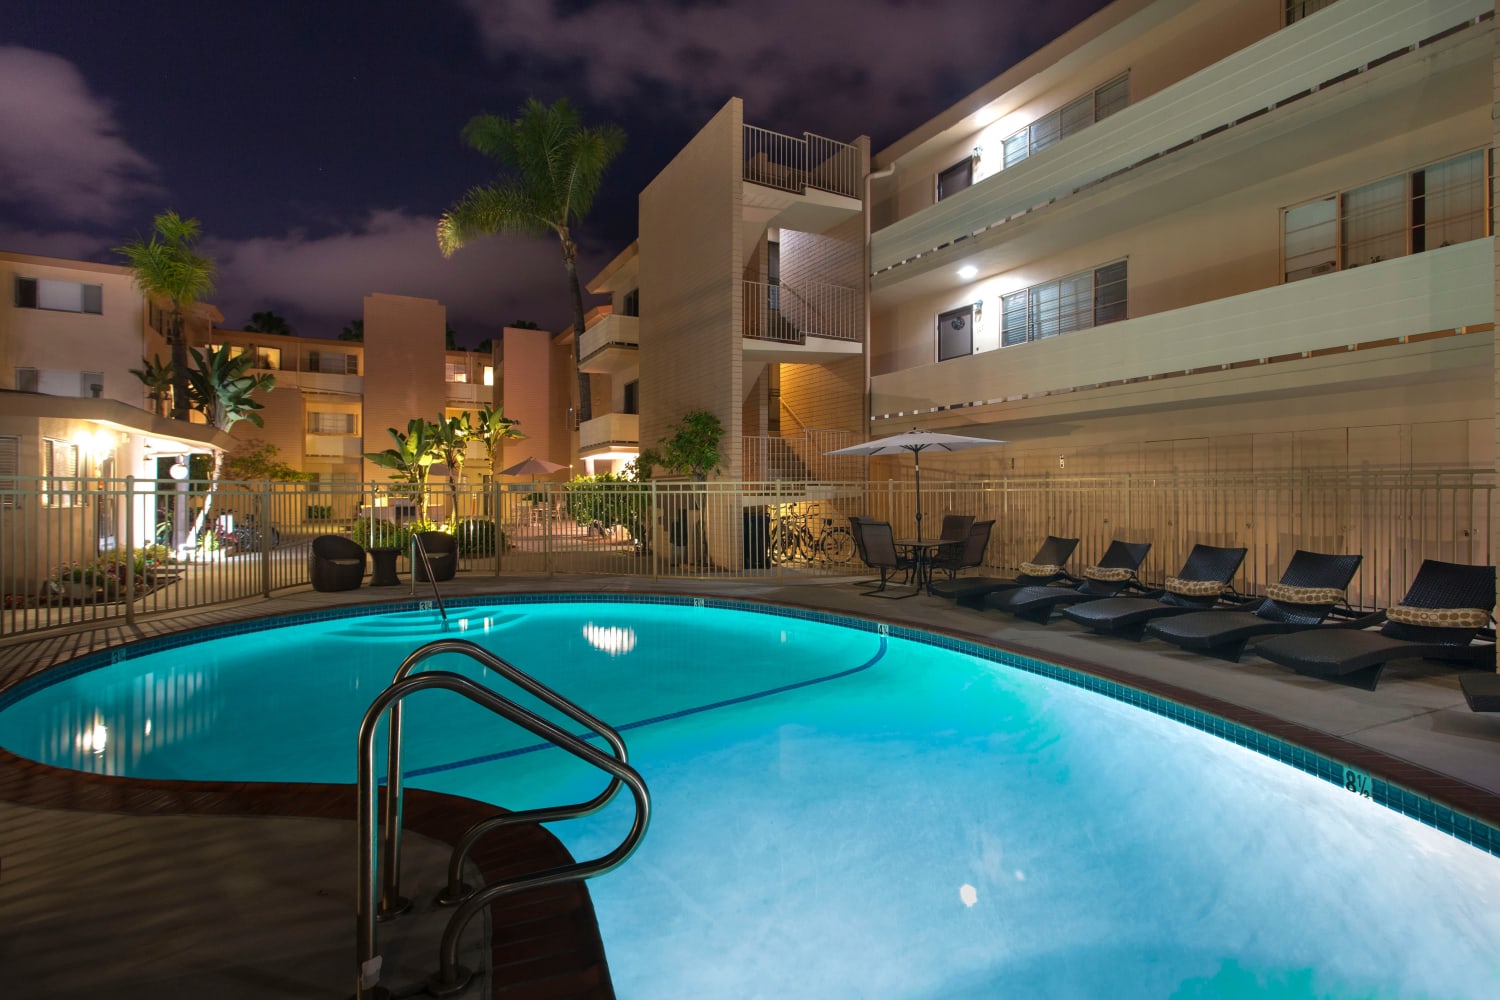 Pool at night with palm trees and lounge chairs at Emerald Manor Apartments in San Diego, California